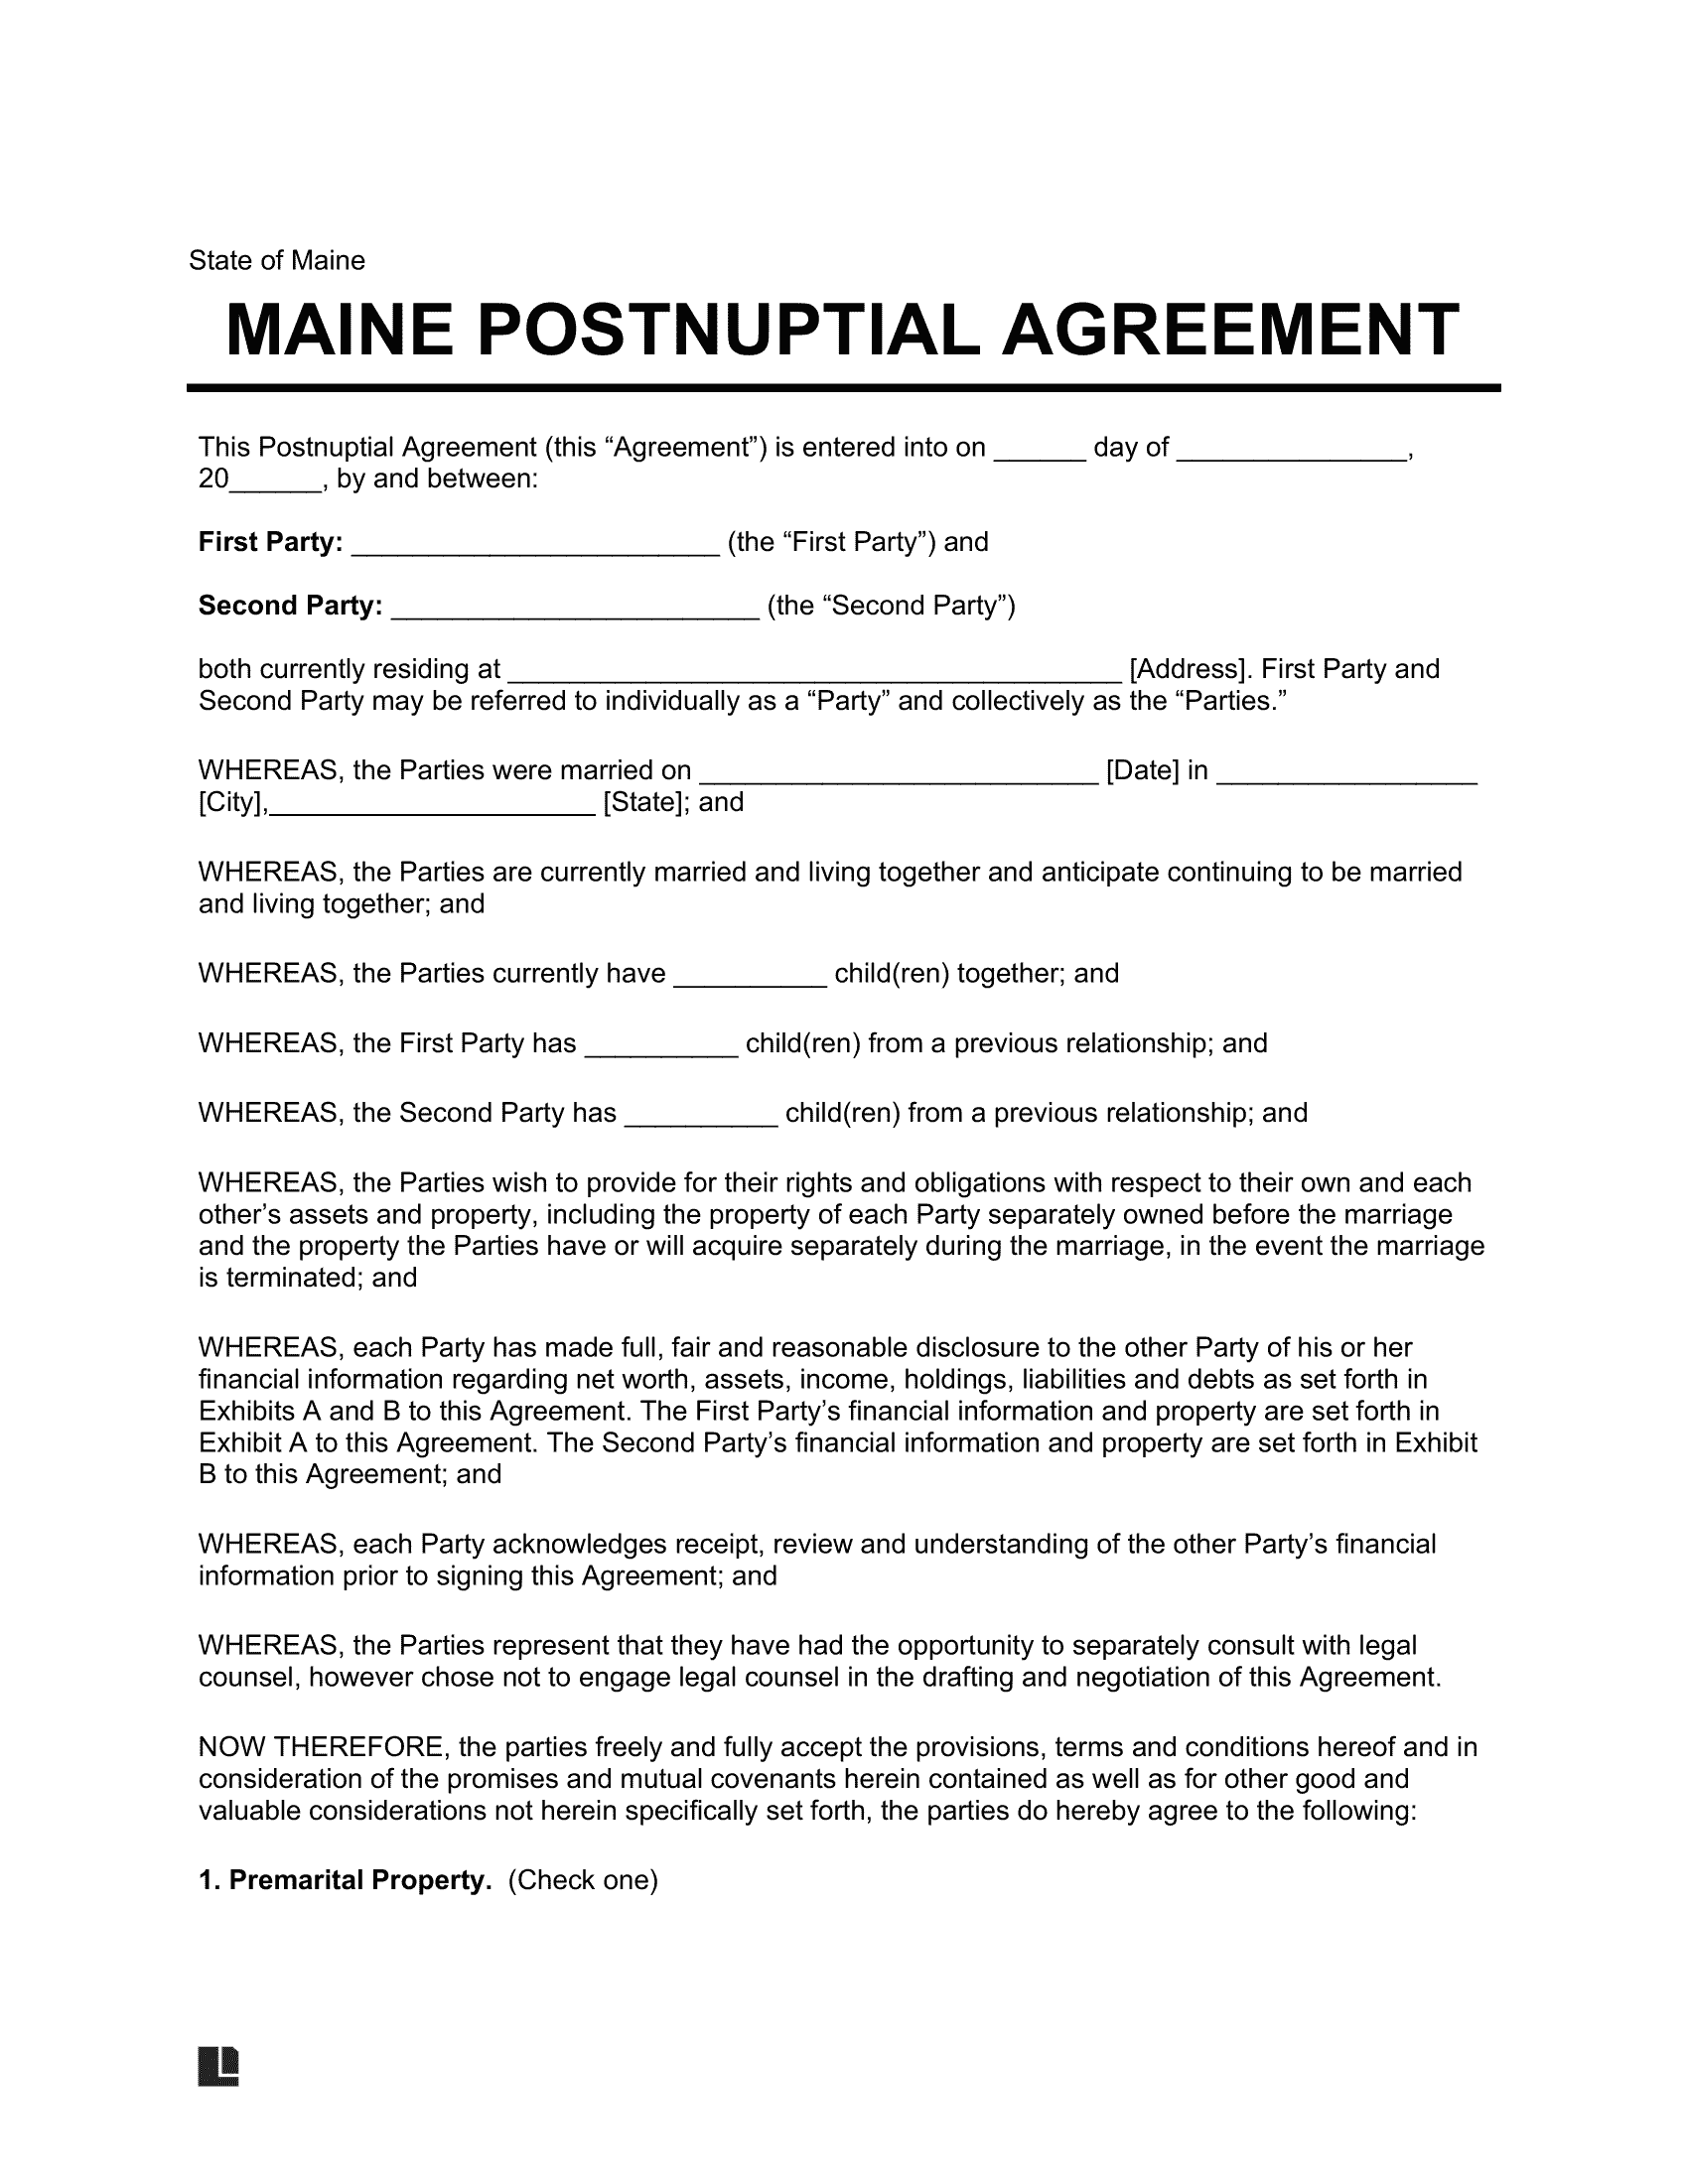 Maine Postnuptial Agreement Template